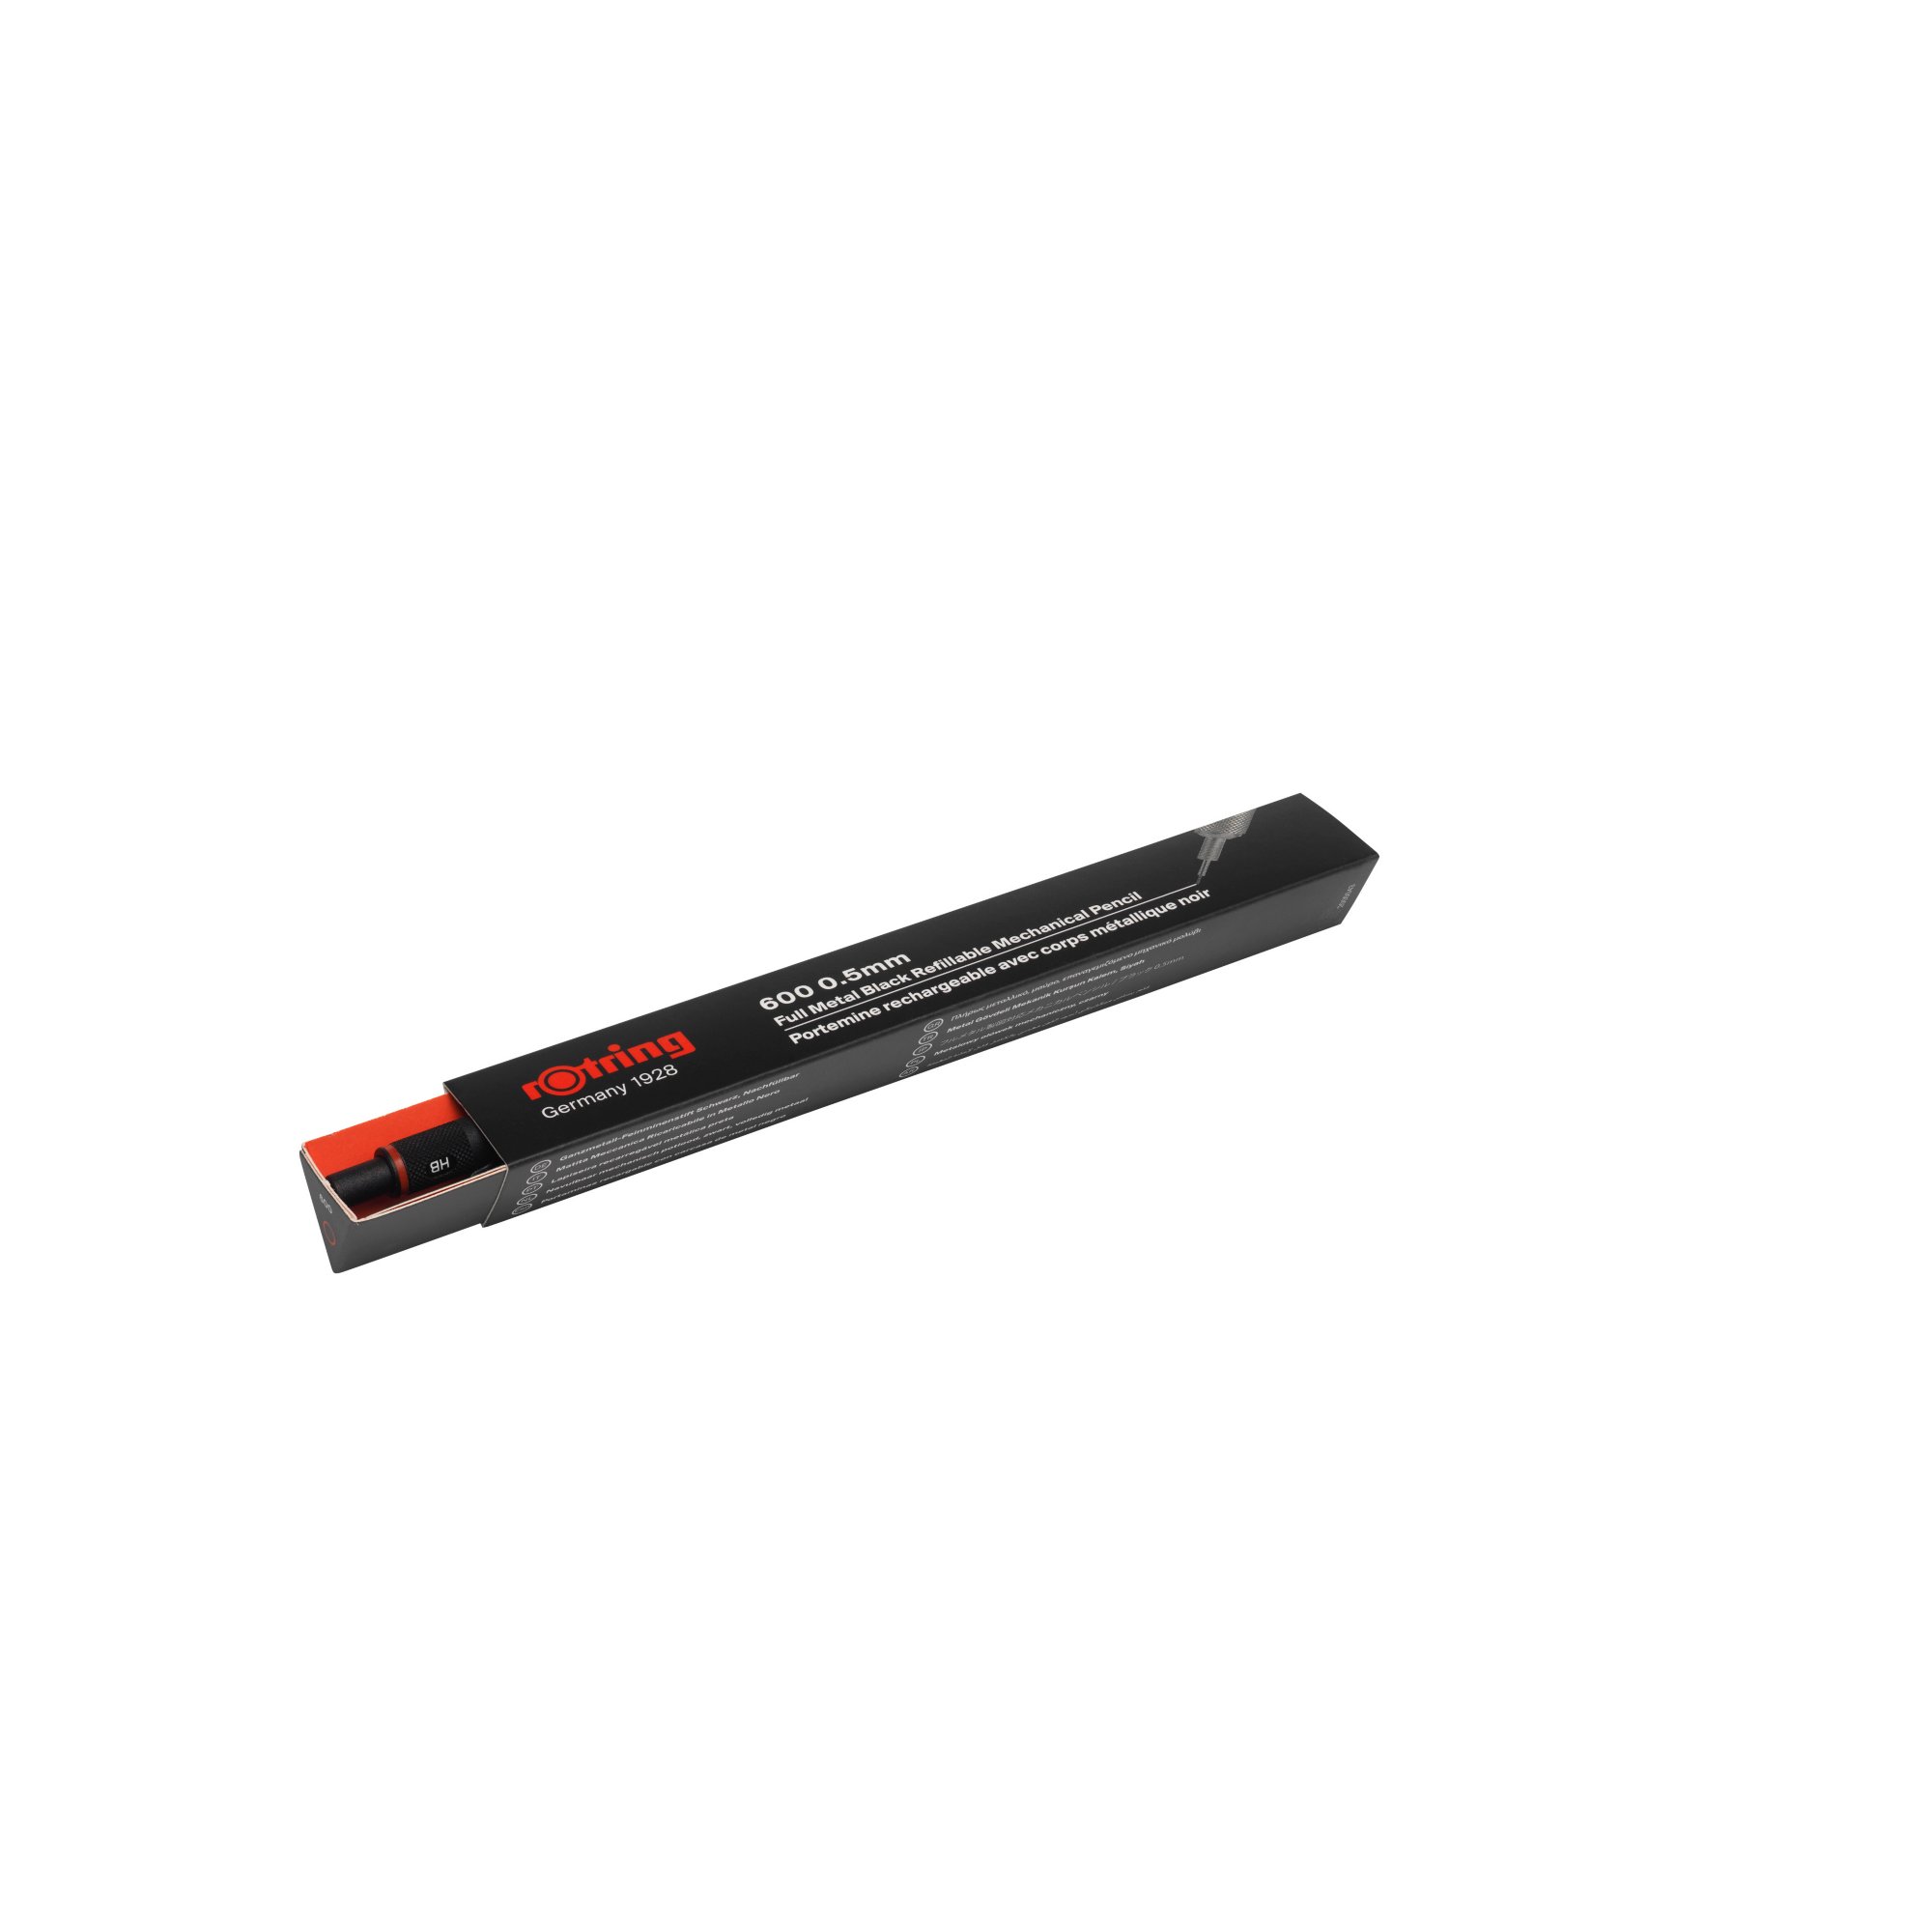 Another Modern Classic: The Rotring 600 Pencil — The Gentleman